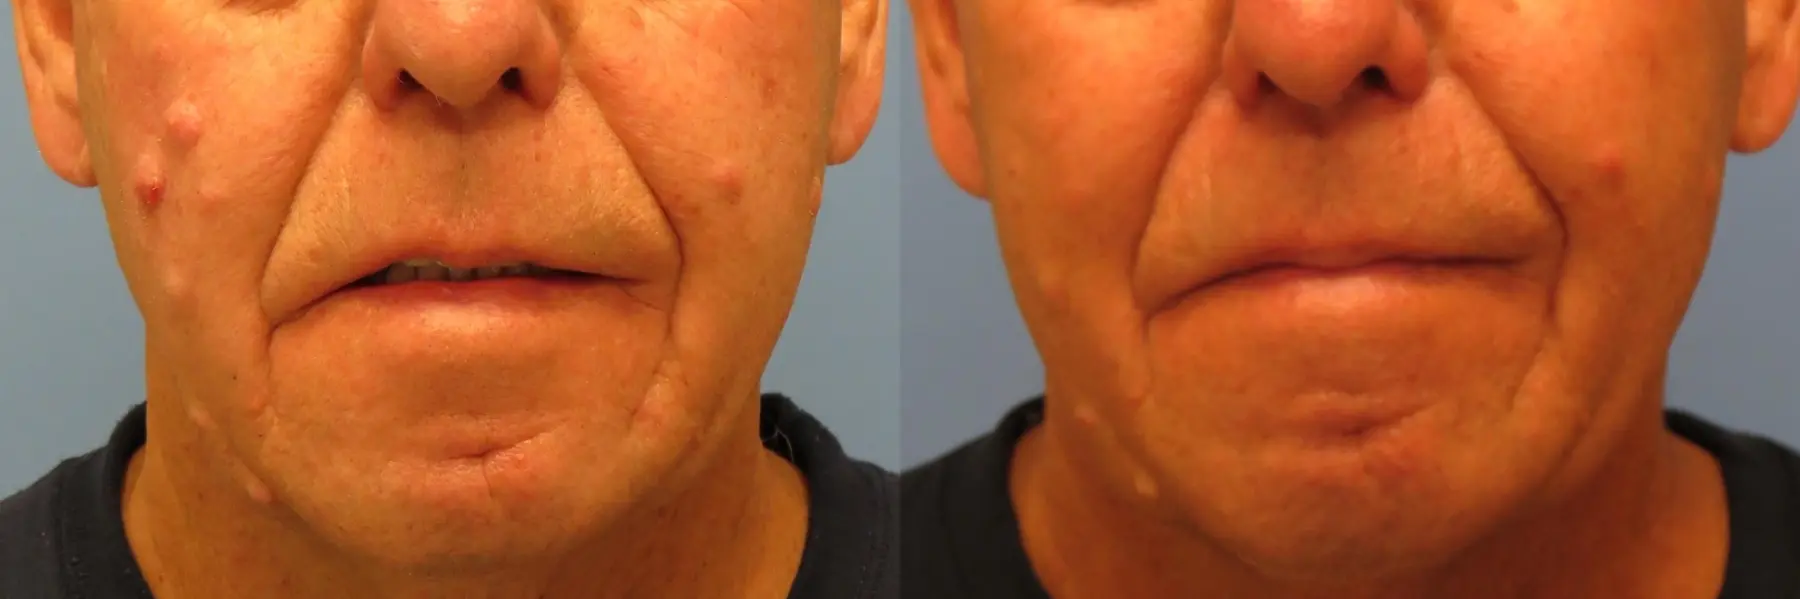 Mole Or Age Spot Removal: Patient 2 - Before and After  